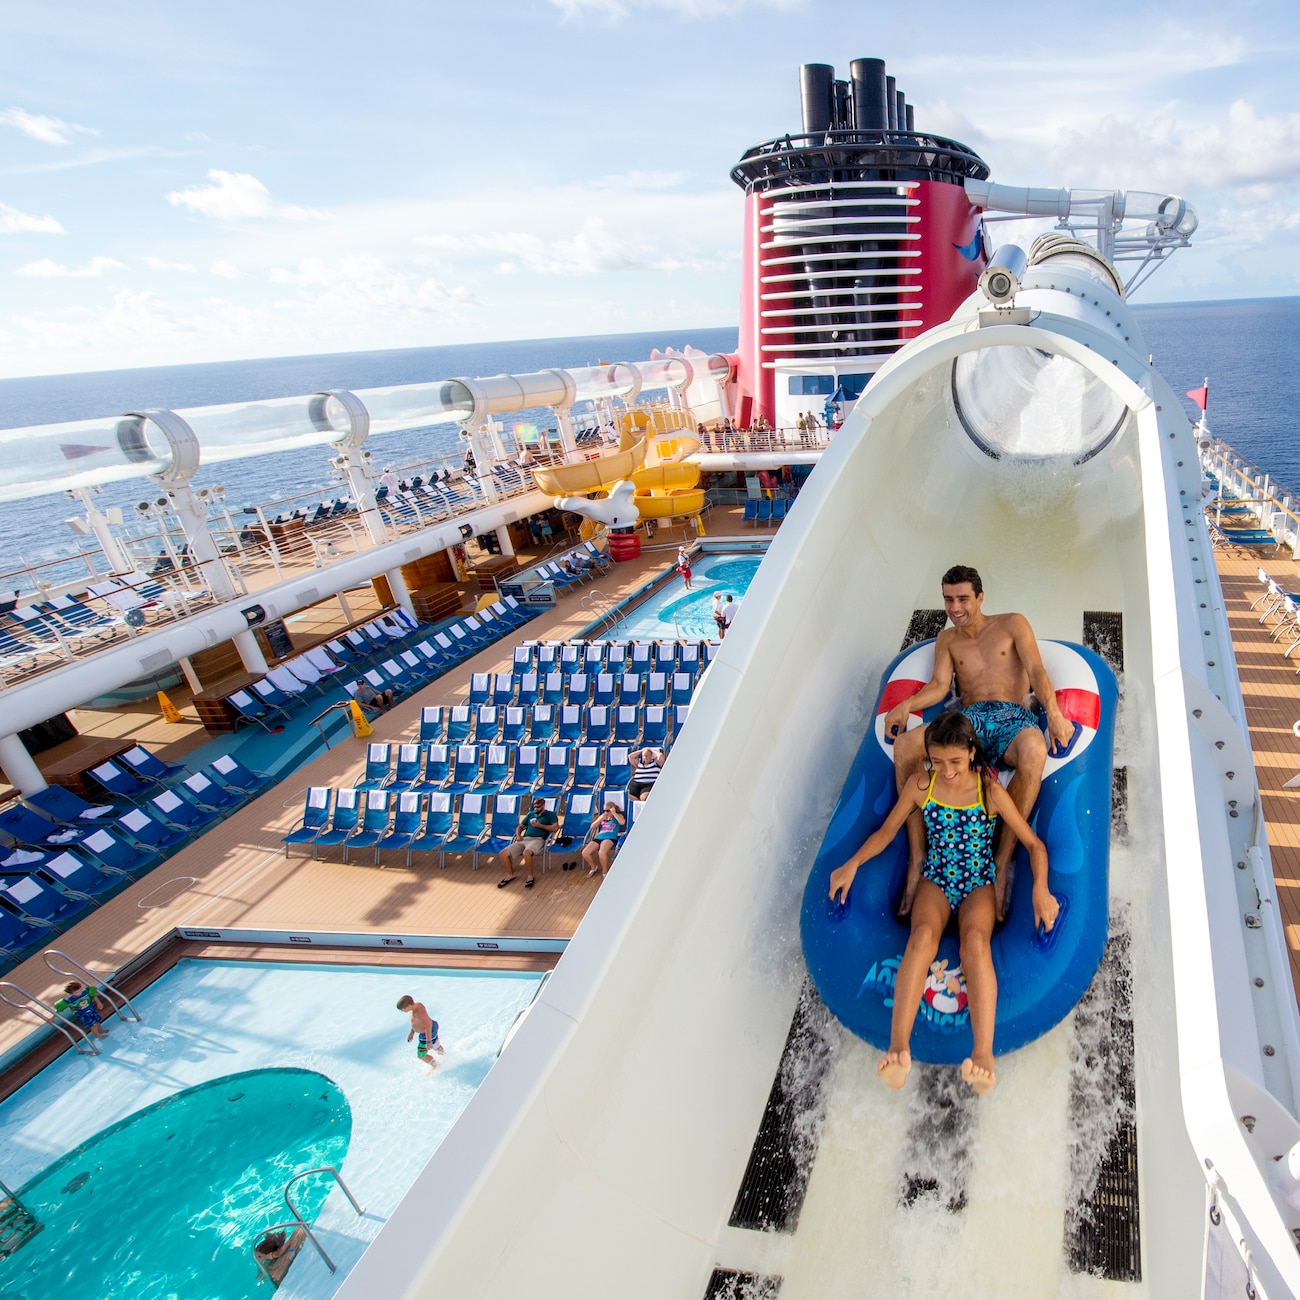 A boy and girl on a raft plunging down a water tube on a Disney cruise ship